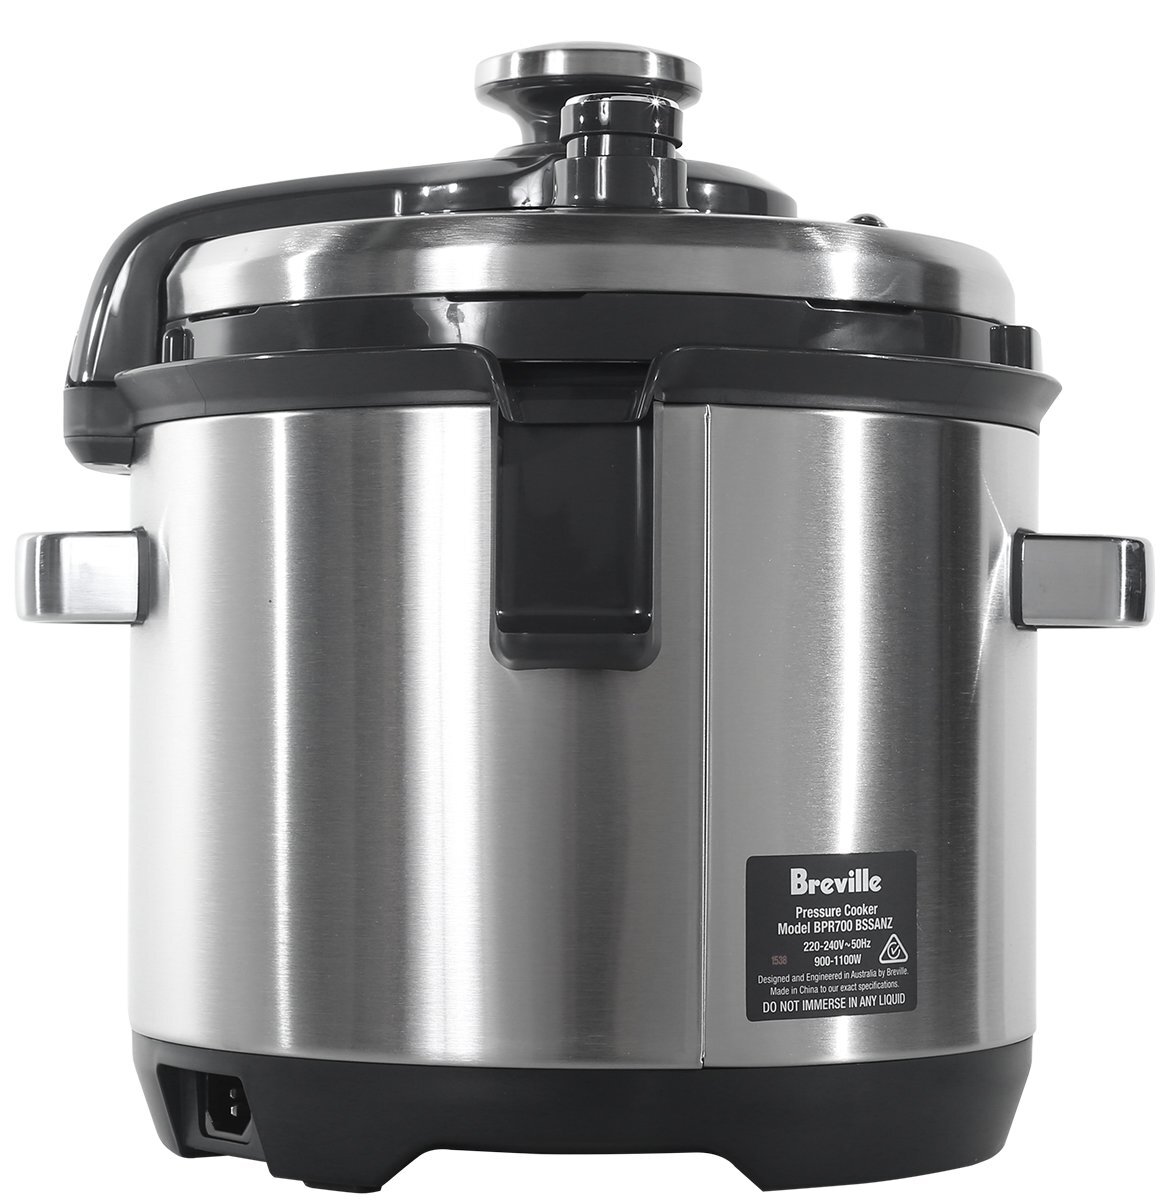 Breville Fast Slow Pro 6-Qt Pressure Cooker BPR700 with Pot Rack Working